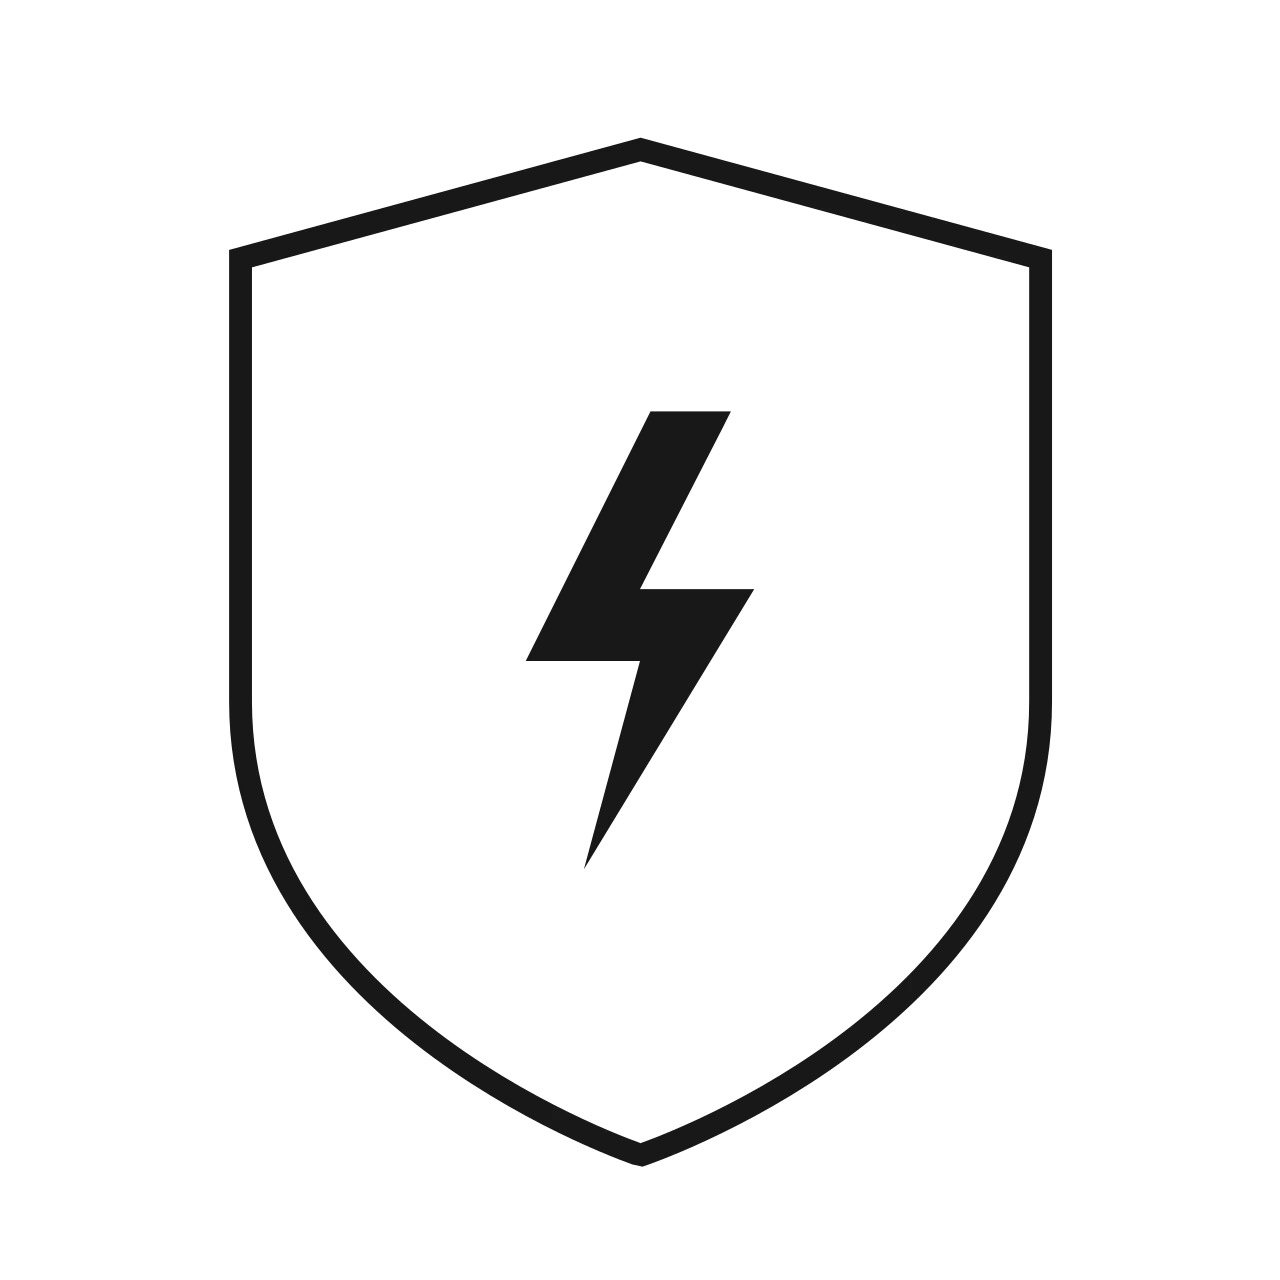 Surge protection icon